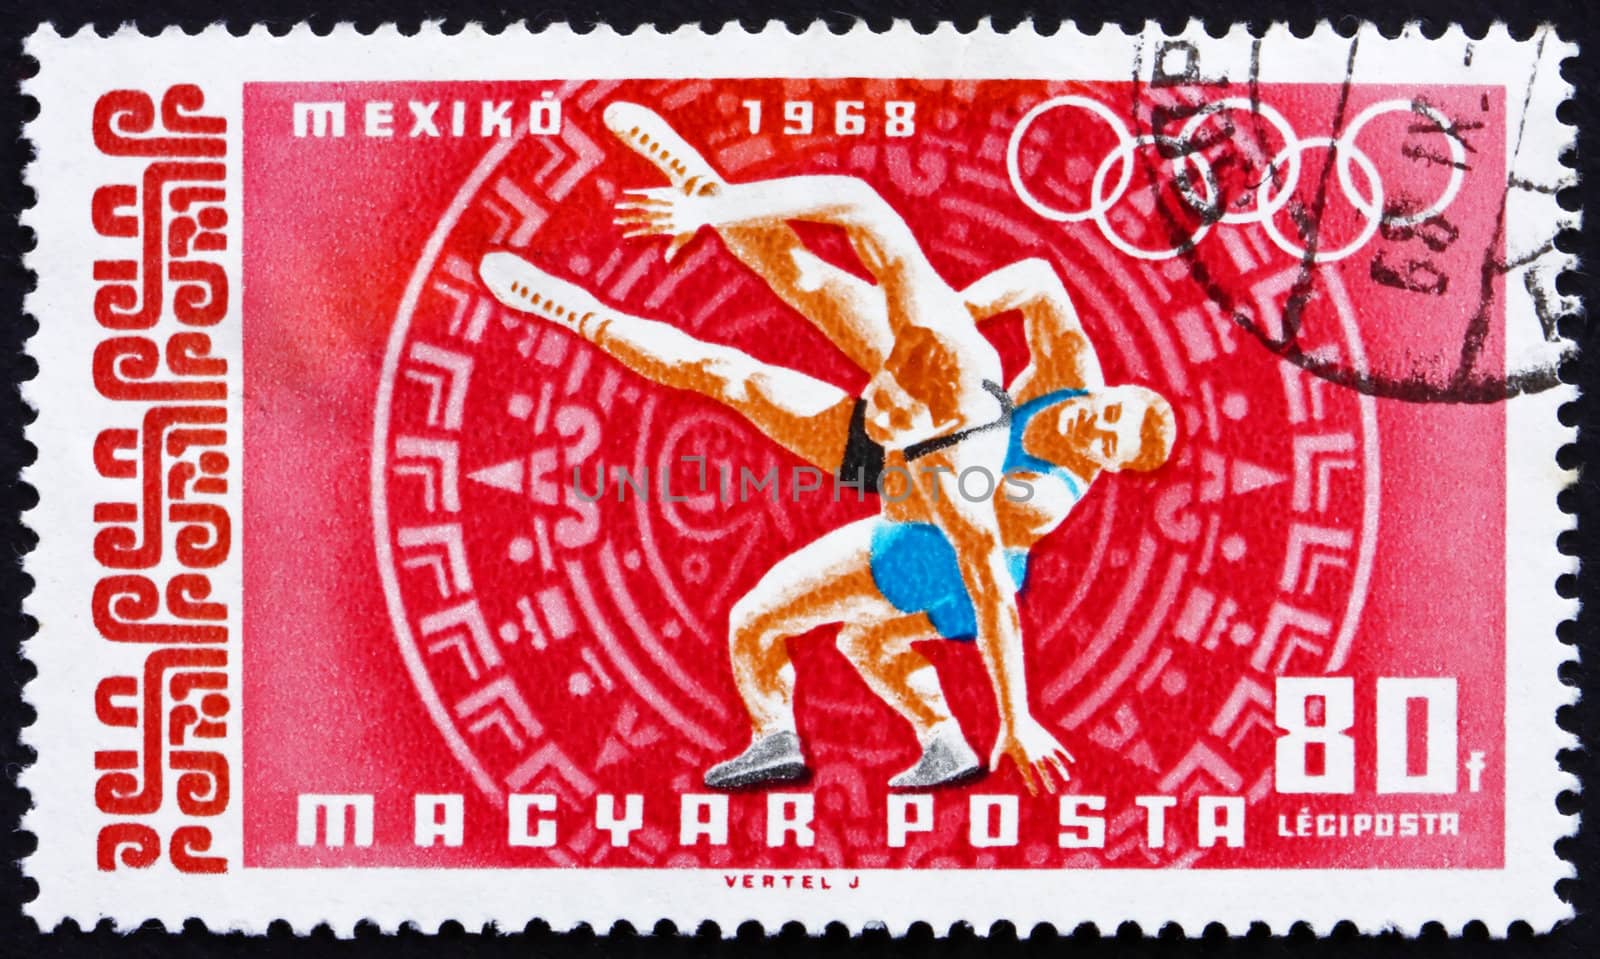 Postage stamp Hungary 1968 Wrestling, Olympic sports, Mexico 68 by Boris15